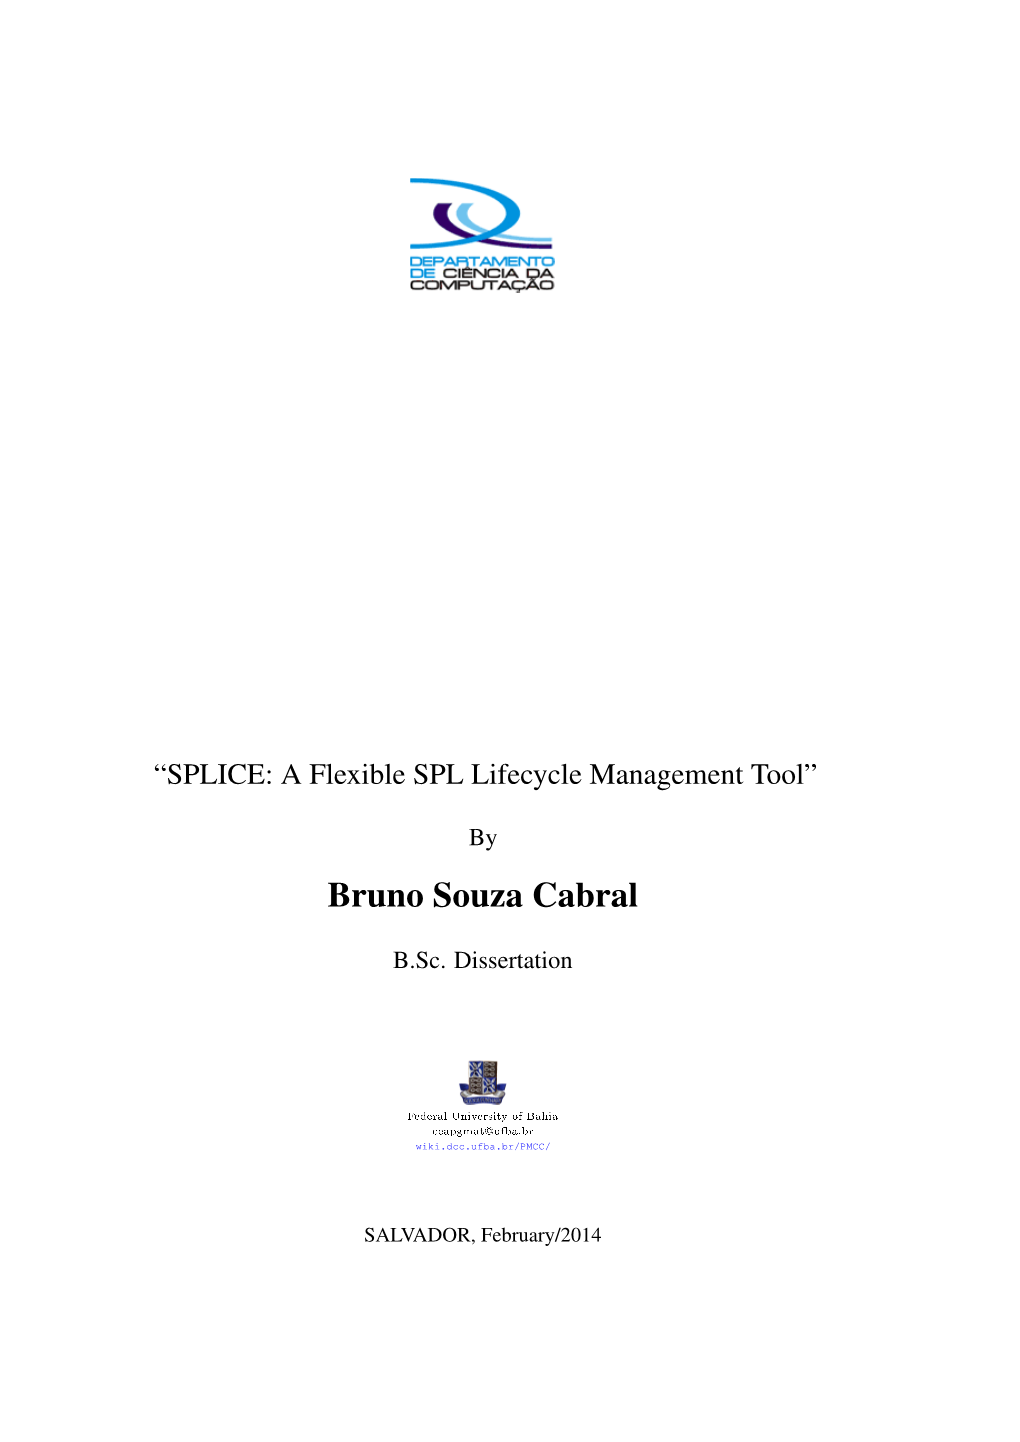 Bruno Cabral's Bachelor Thesis